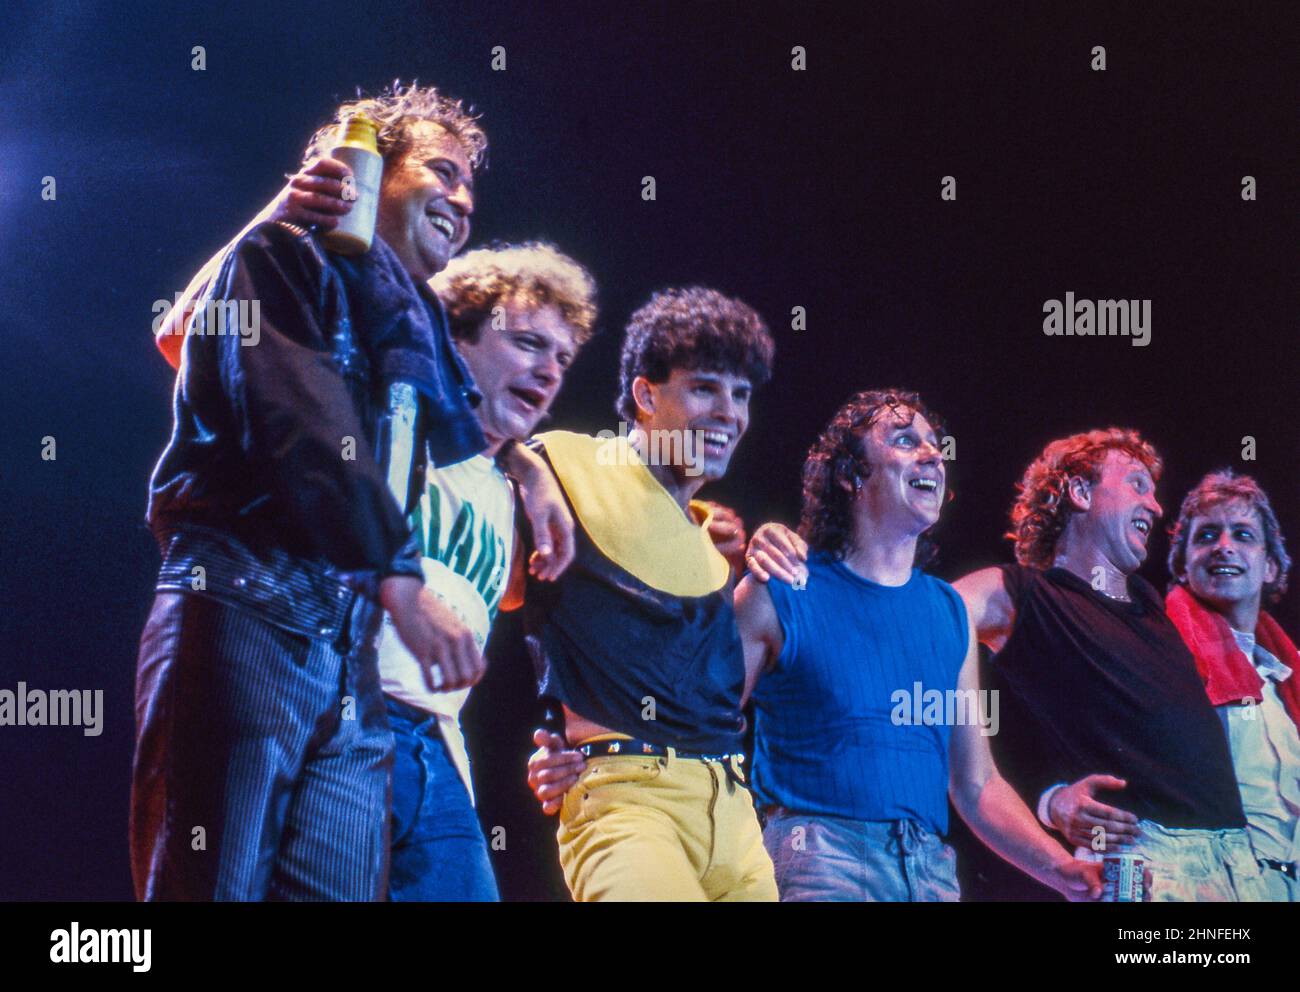 Mick Jones, Lou Gramm, Mark Rivera, Dennis Elliott, Rick Wills and Bob Mayo of Anglo-American band Foreigner taking a bow at the end of a concert at Wembley Arena, London, in 1982. Stock Photo